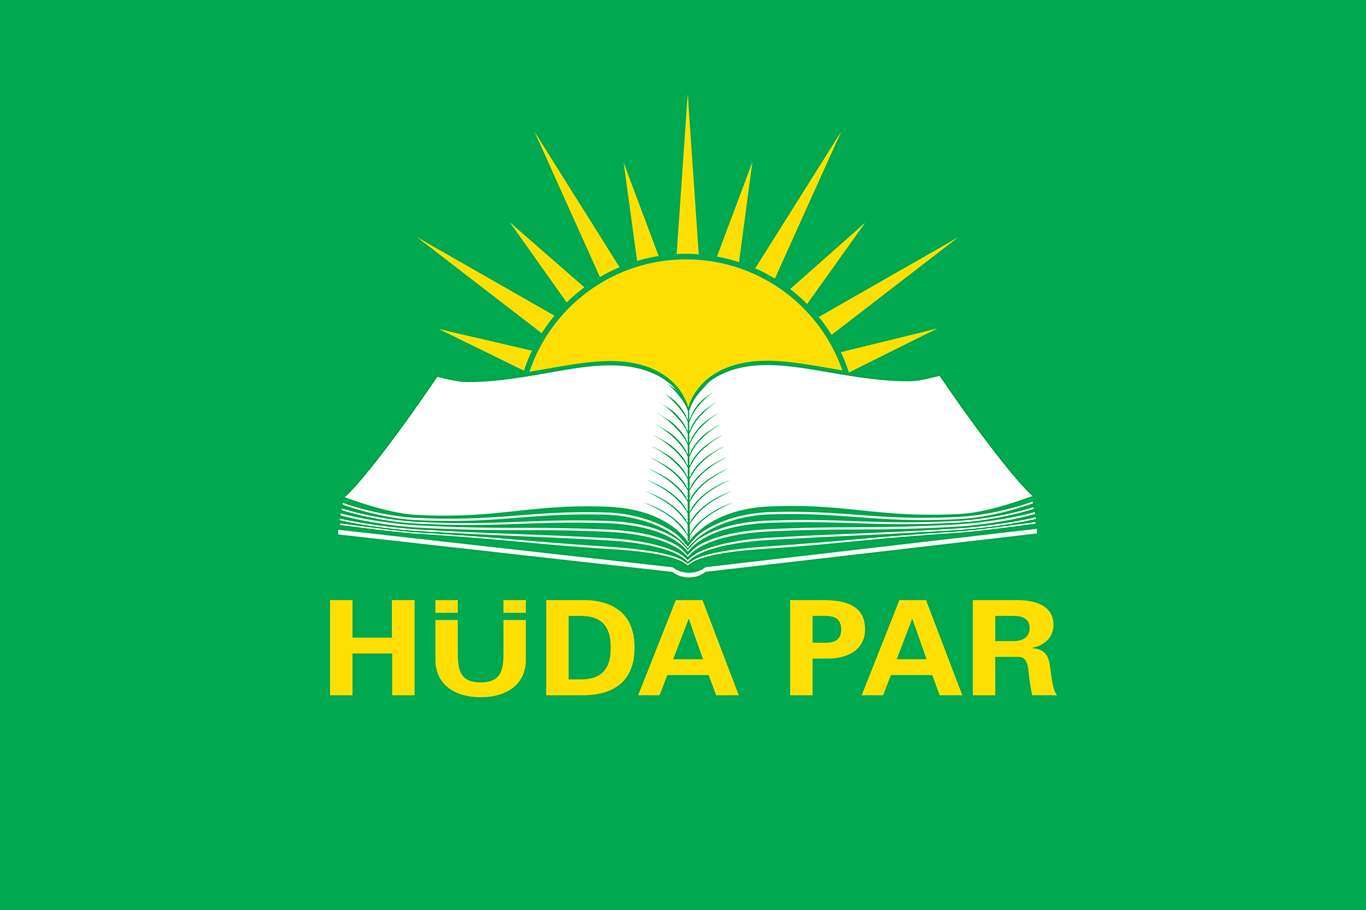 HÜDA PAR: 11 million people die every year due to hunger or malnutrition